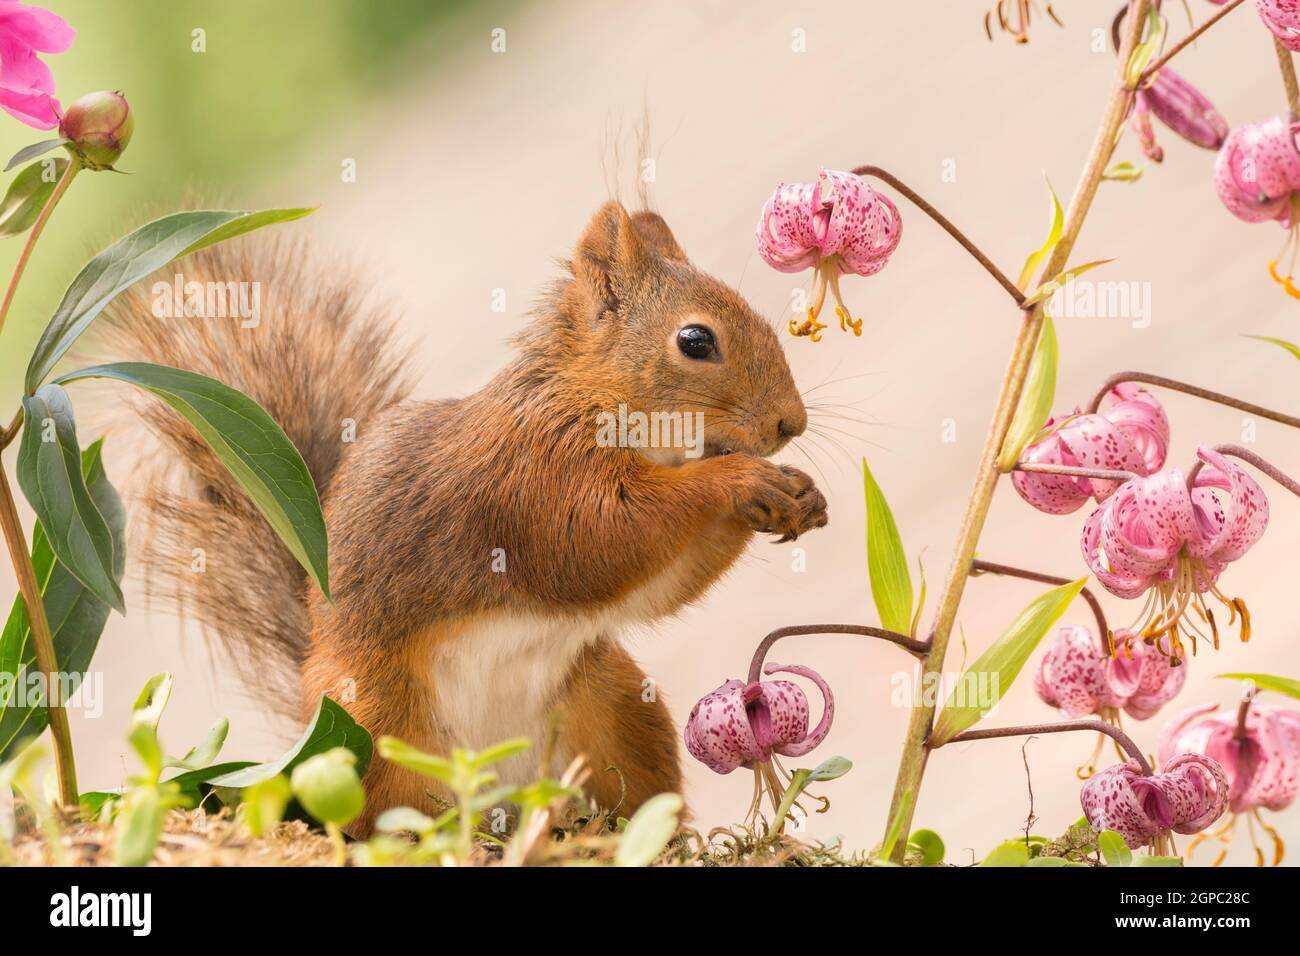 red squirrel standing with lily and other flowers Stock Photo